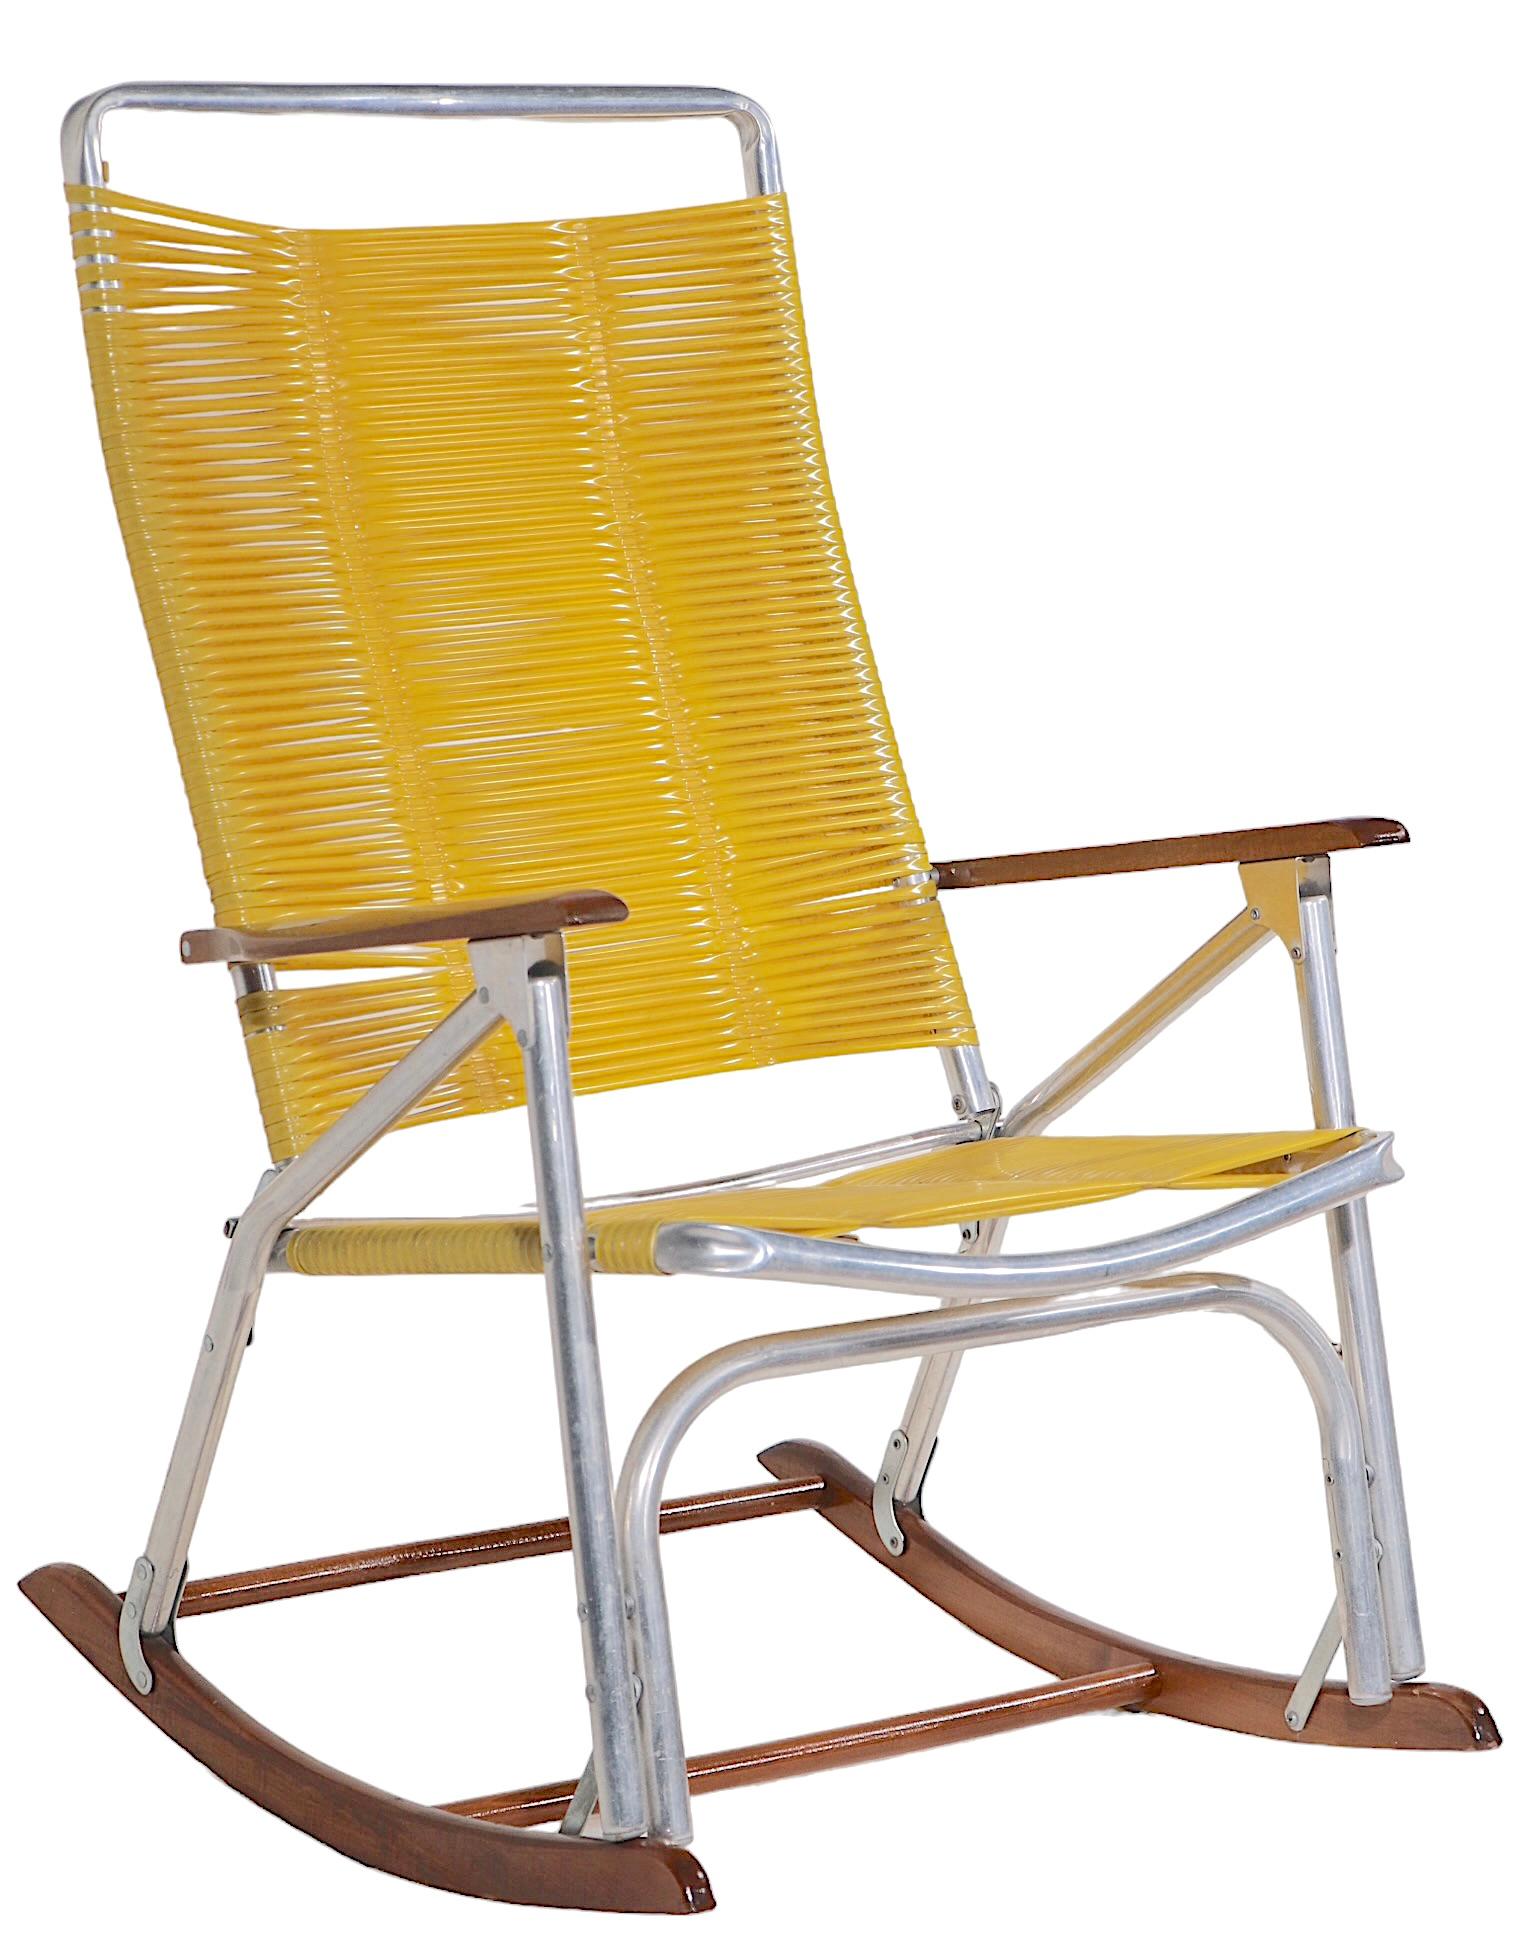 Chic Mid Century  vintage patio, poolside, rocking chair made by the Telescope Chair Company, circa 1950/1970's. The chair features a  bright yellow plastic strap back and seat, wood arm rests and rockers, with a folding tubular aluminum frame. This